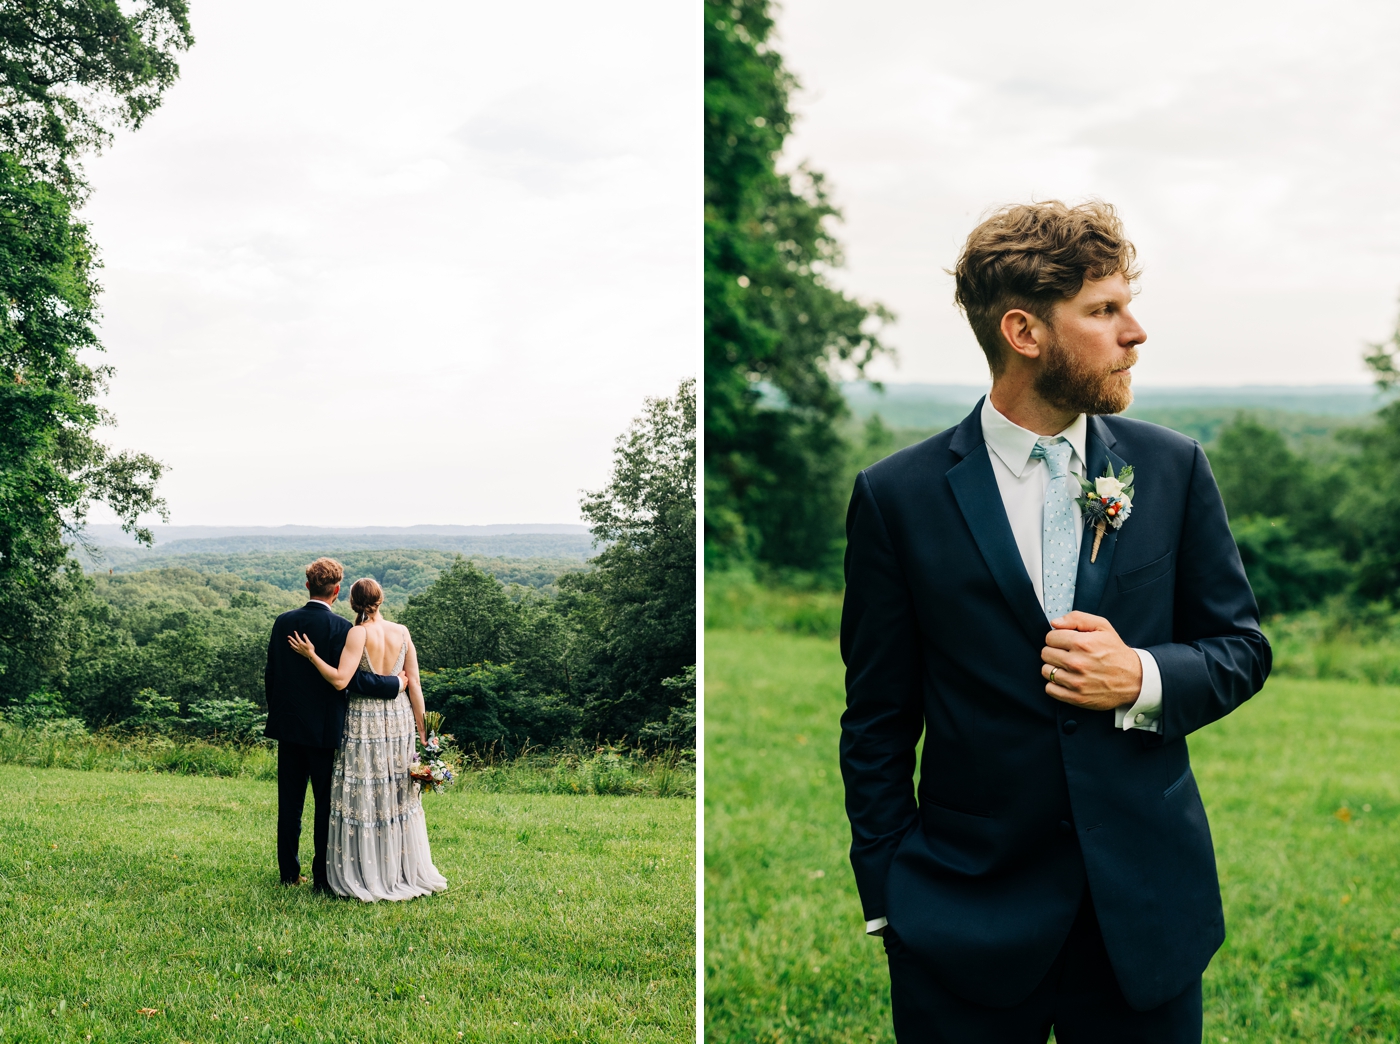 Bride and groom portraits by Mika LH Photography